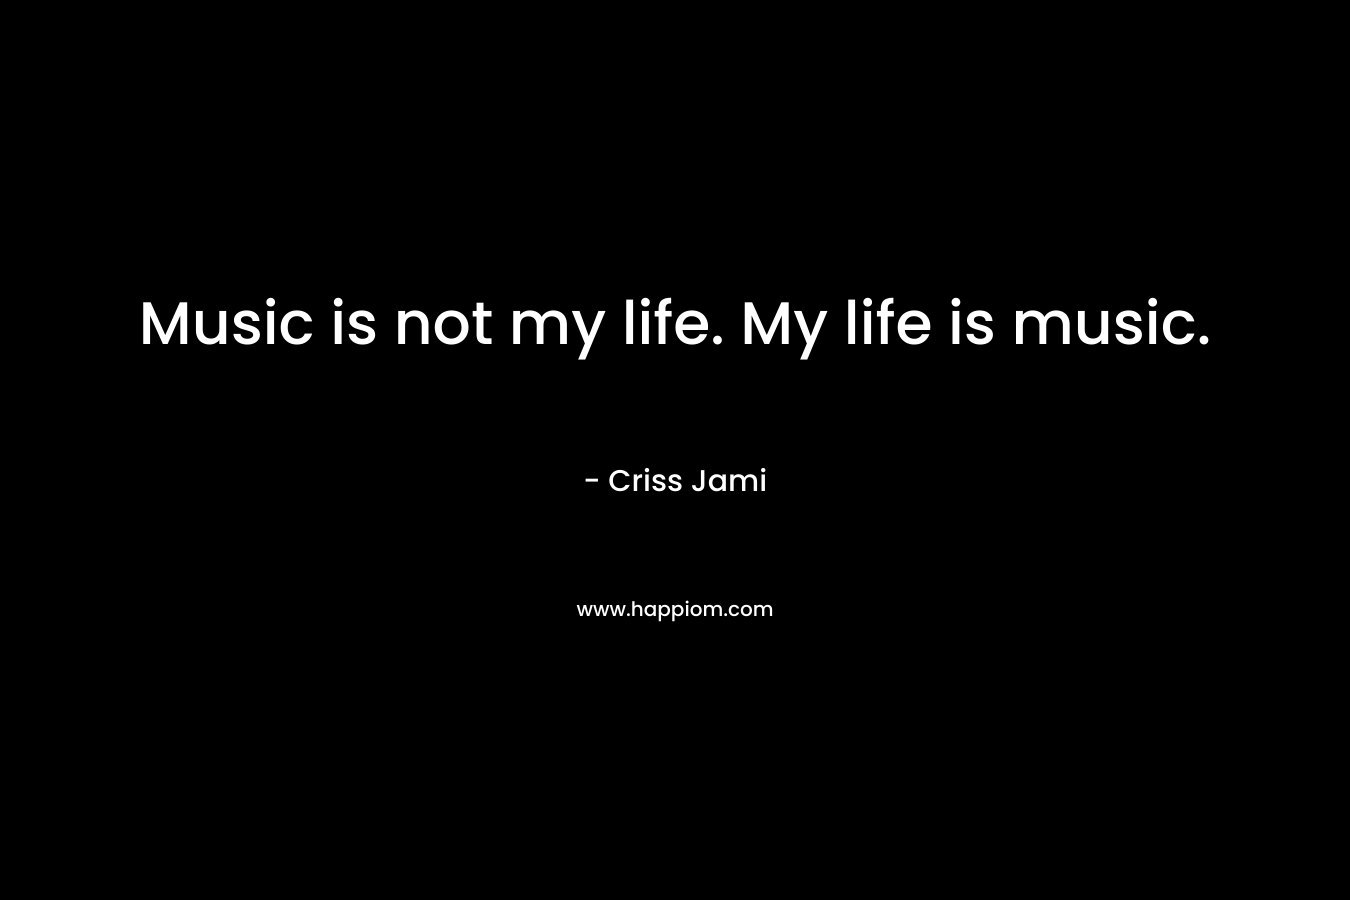 Music is not my life. My life is music.